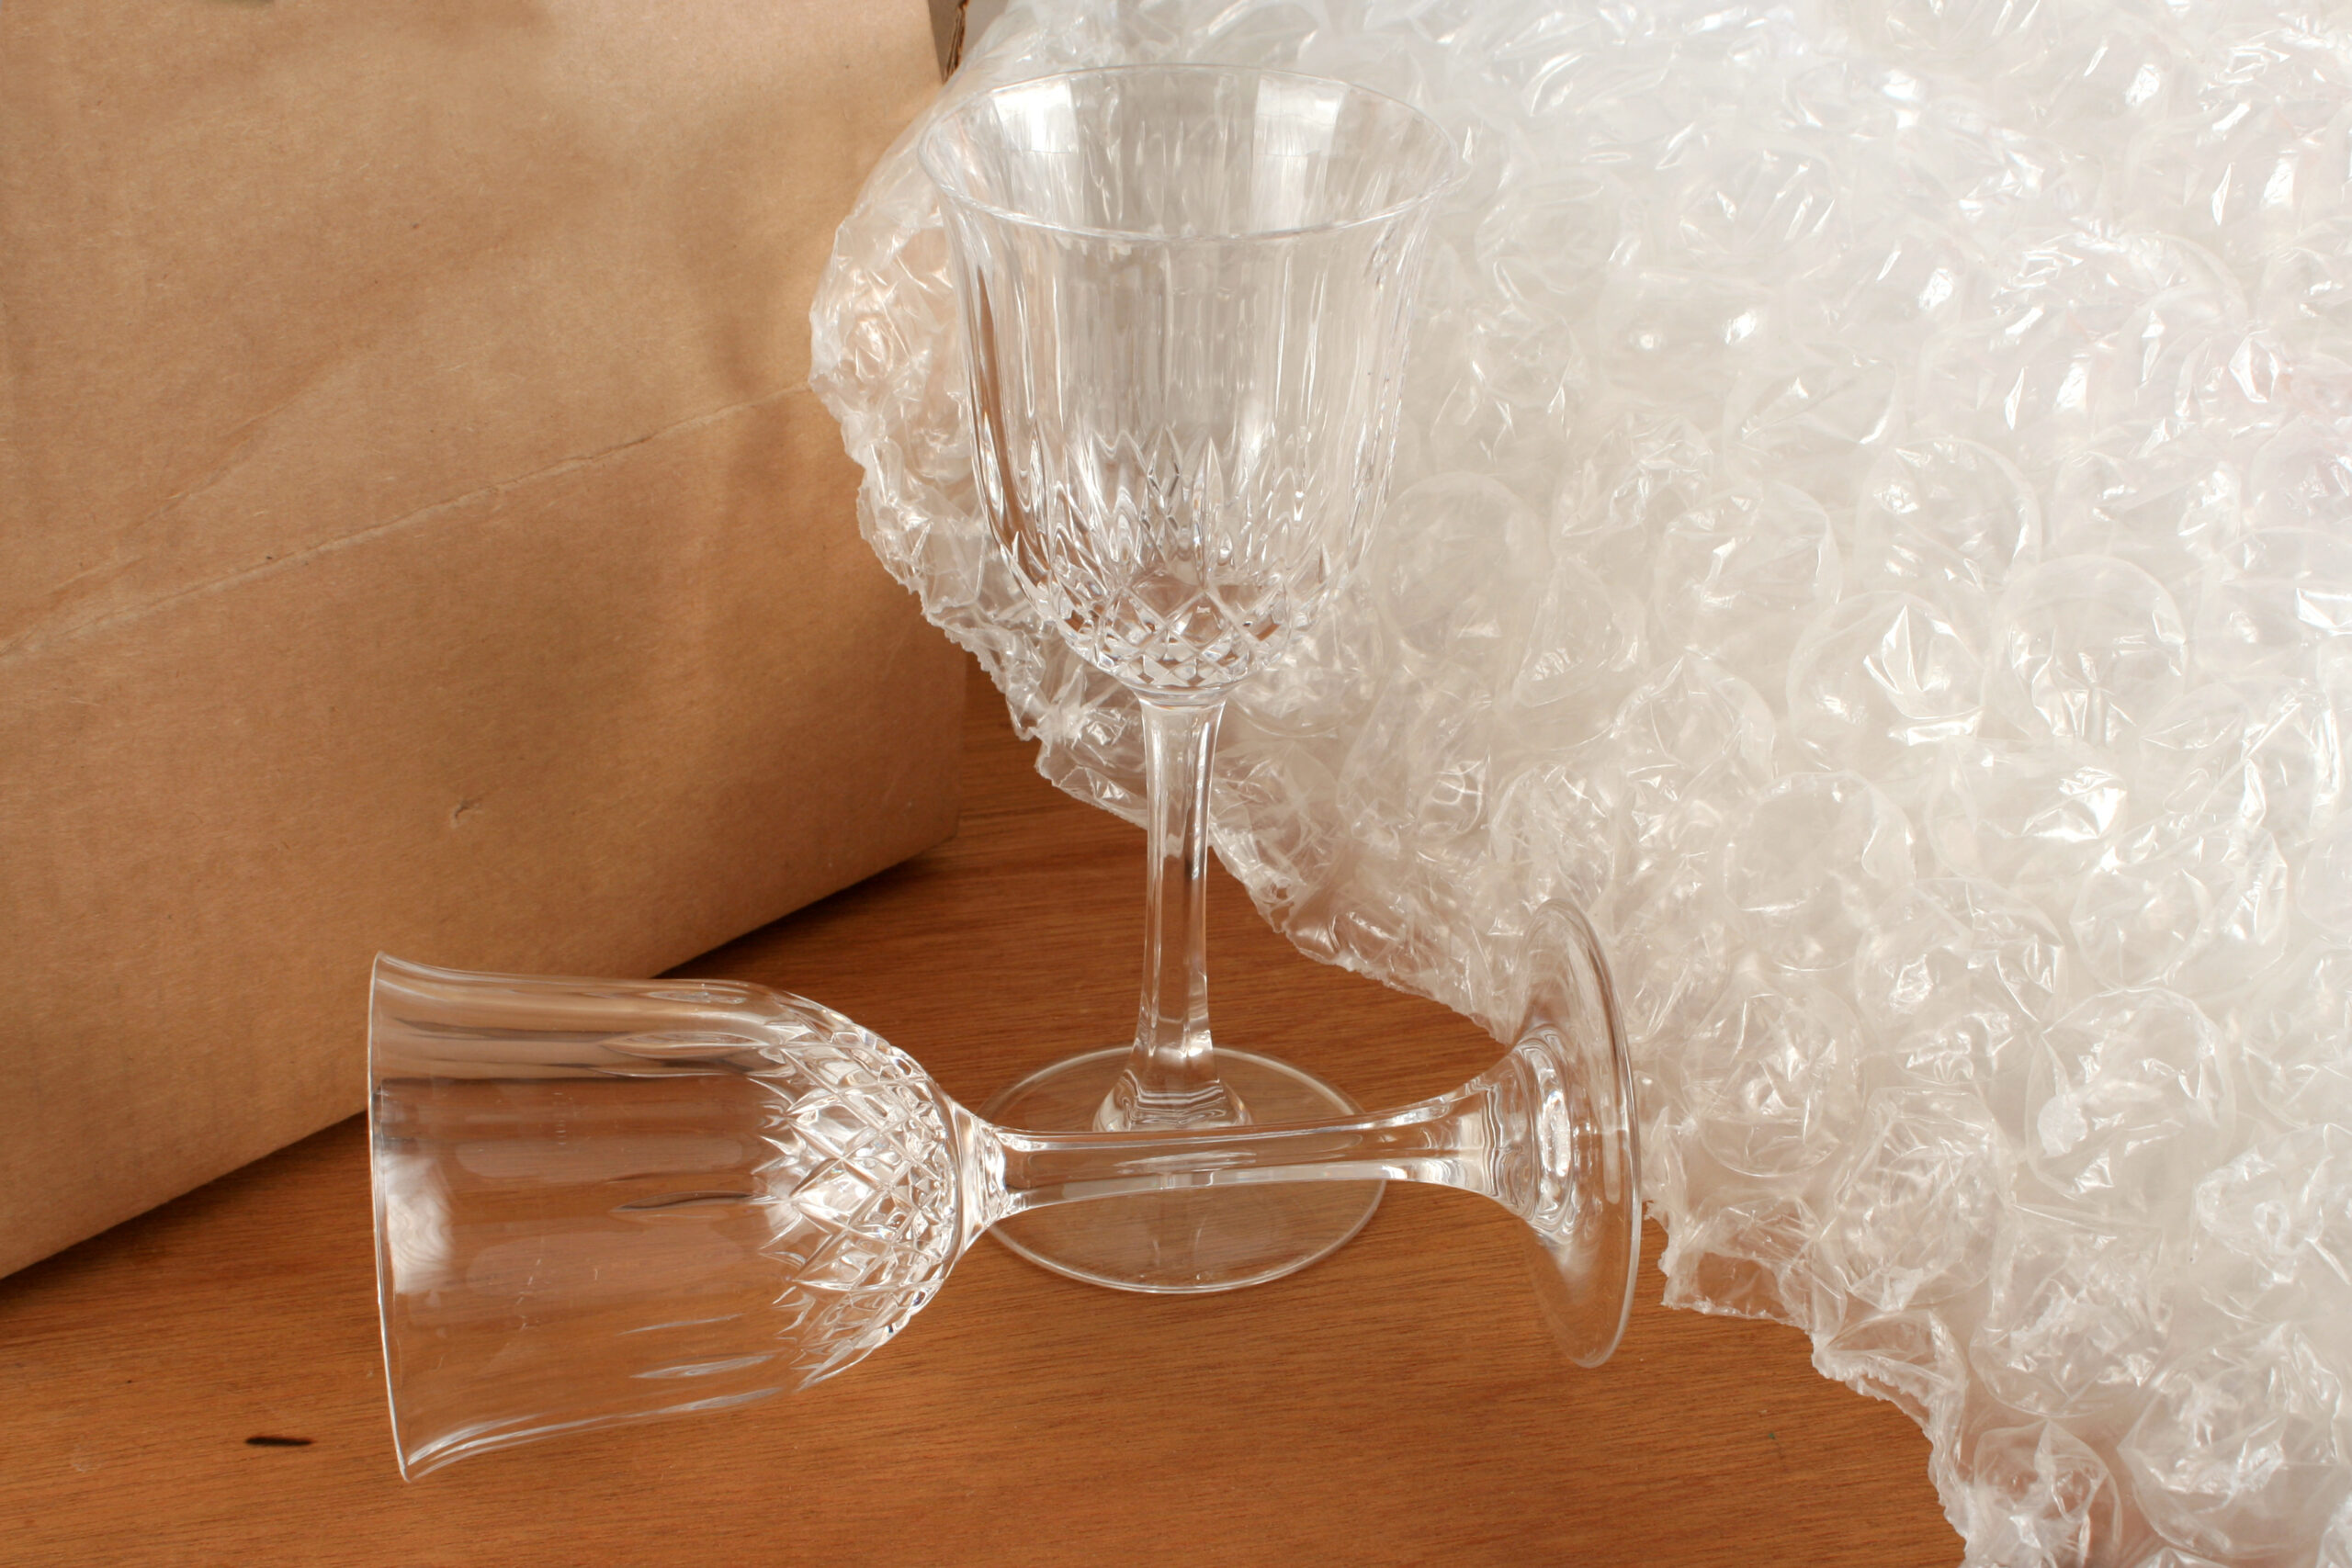 Two crystal glasses next to some bubble wrap and boxes